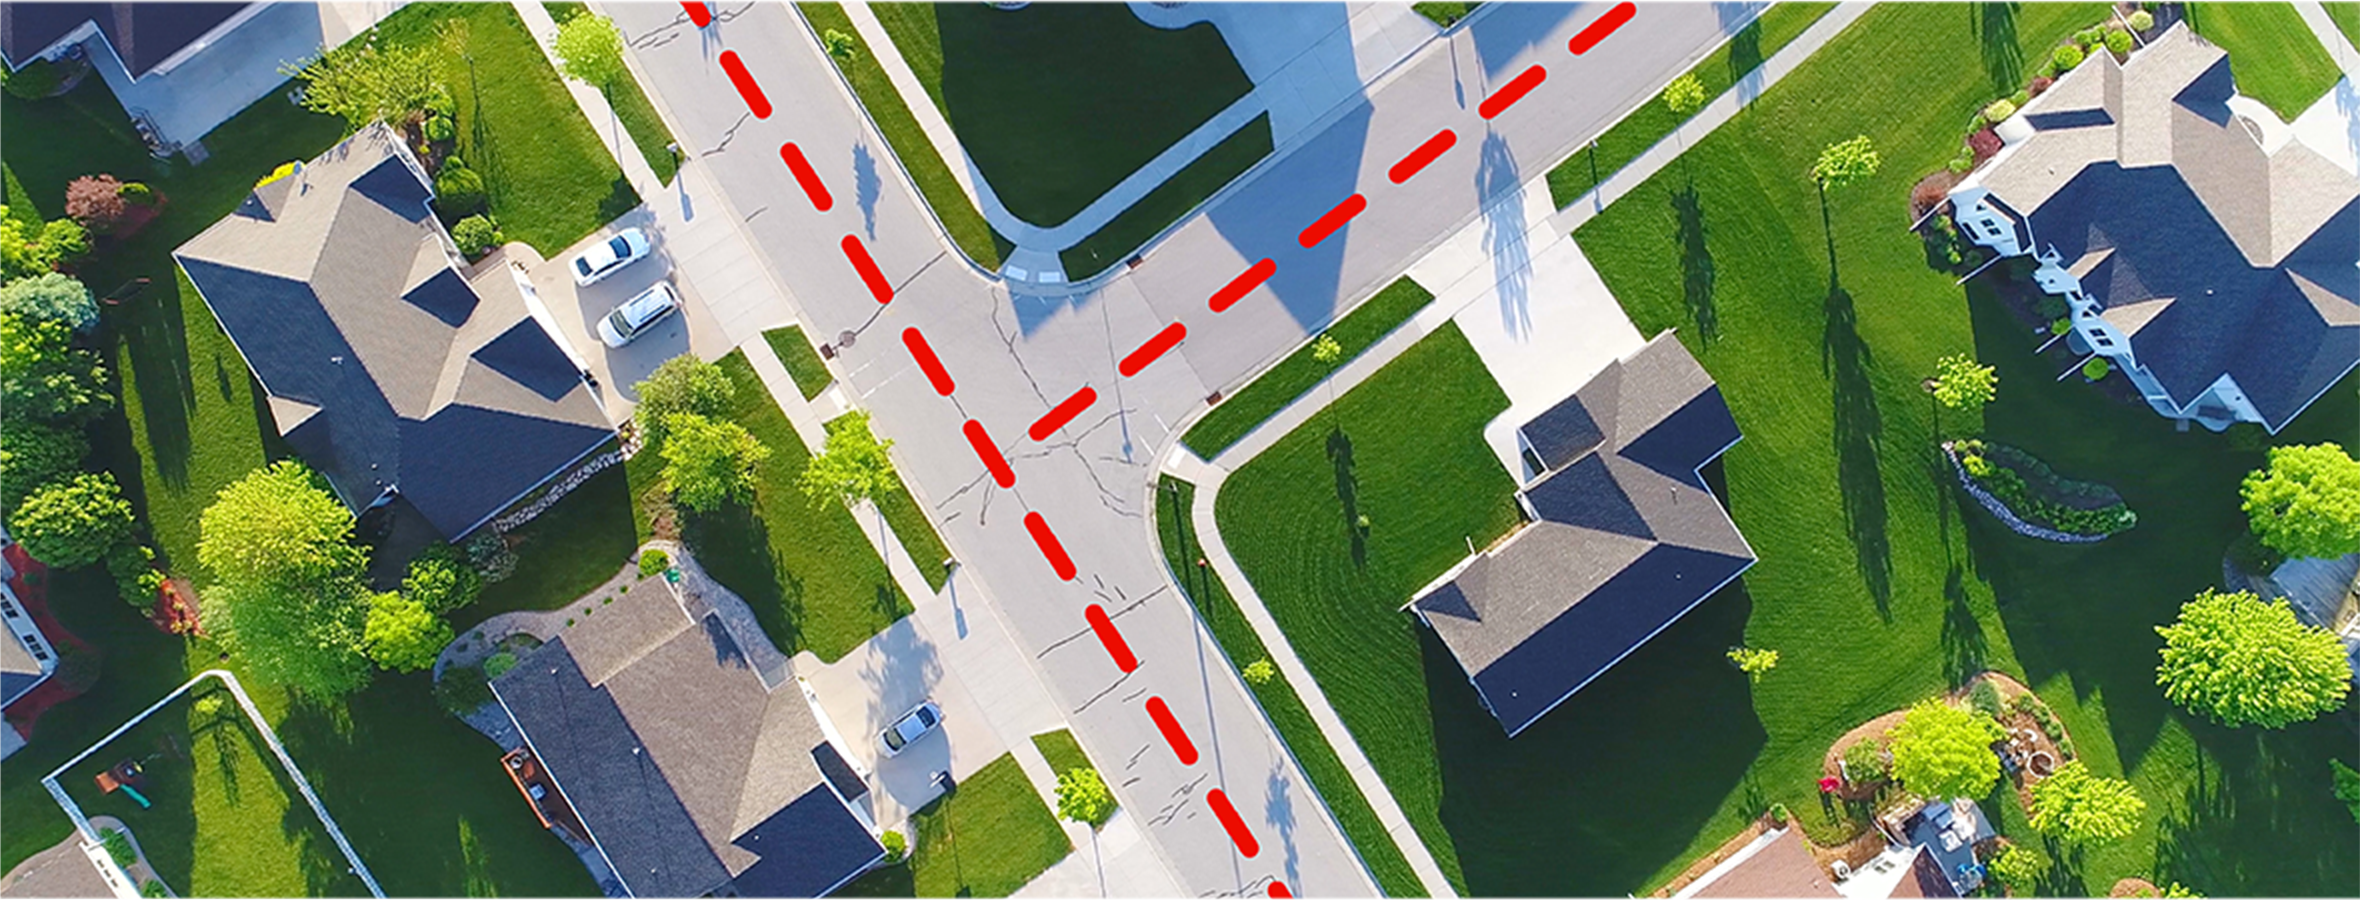 Illustrated aerial map of a residential neighborhood